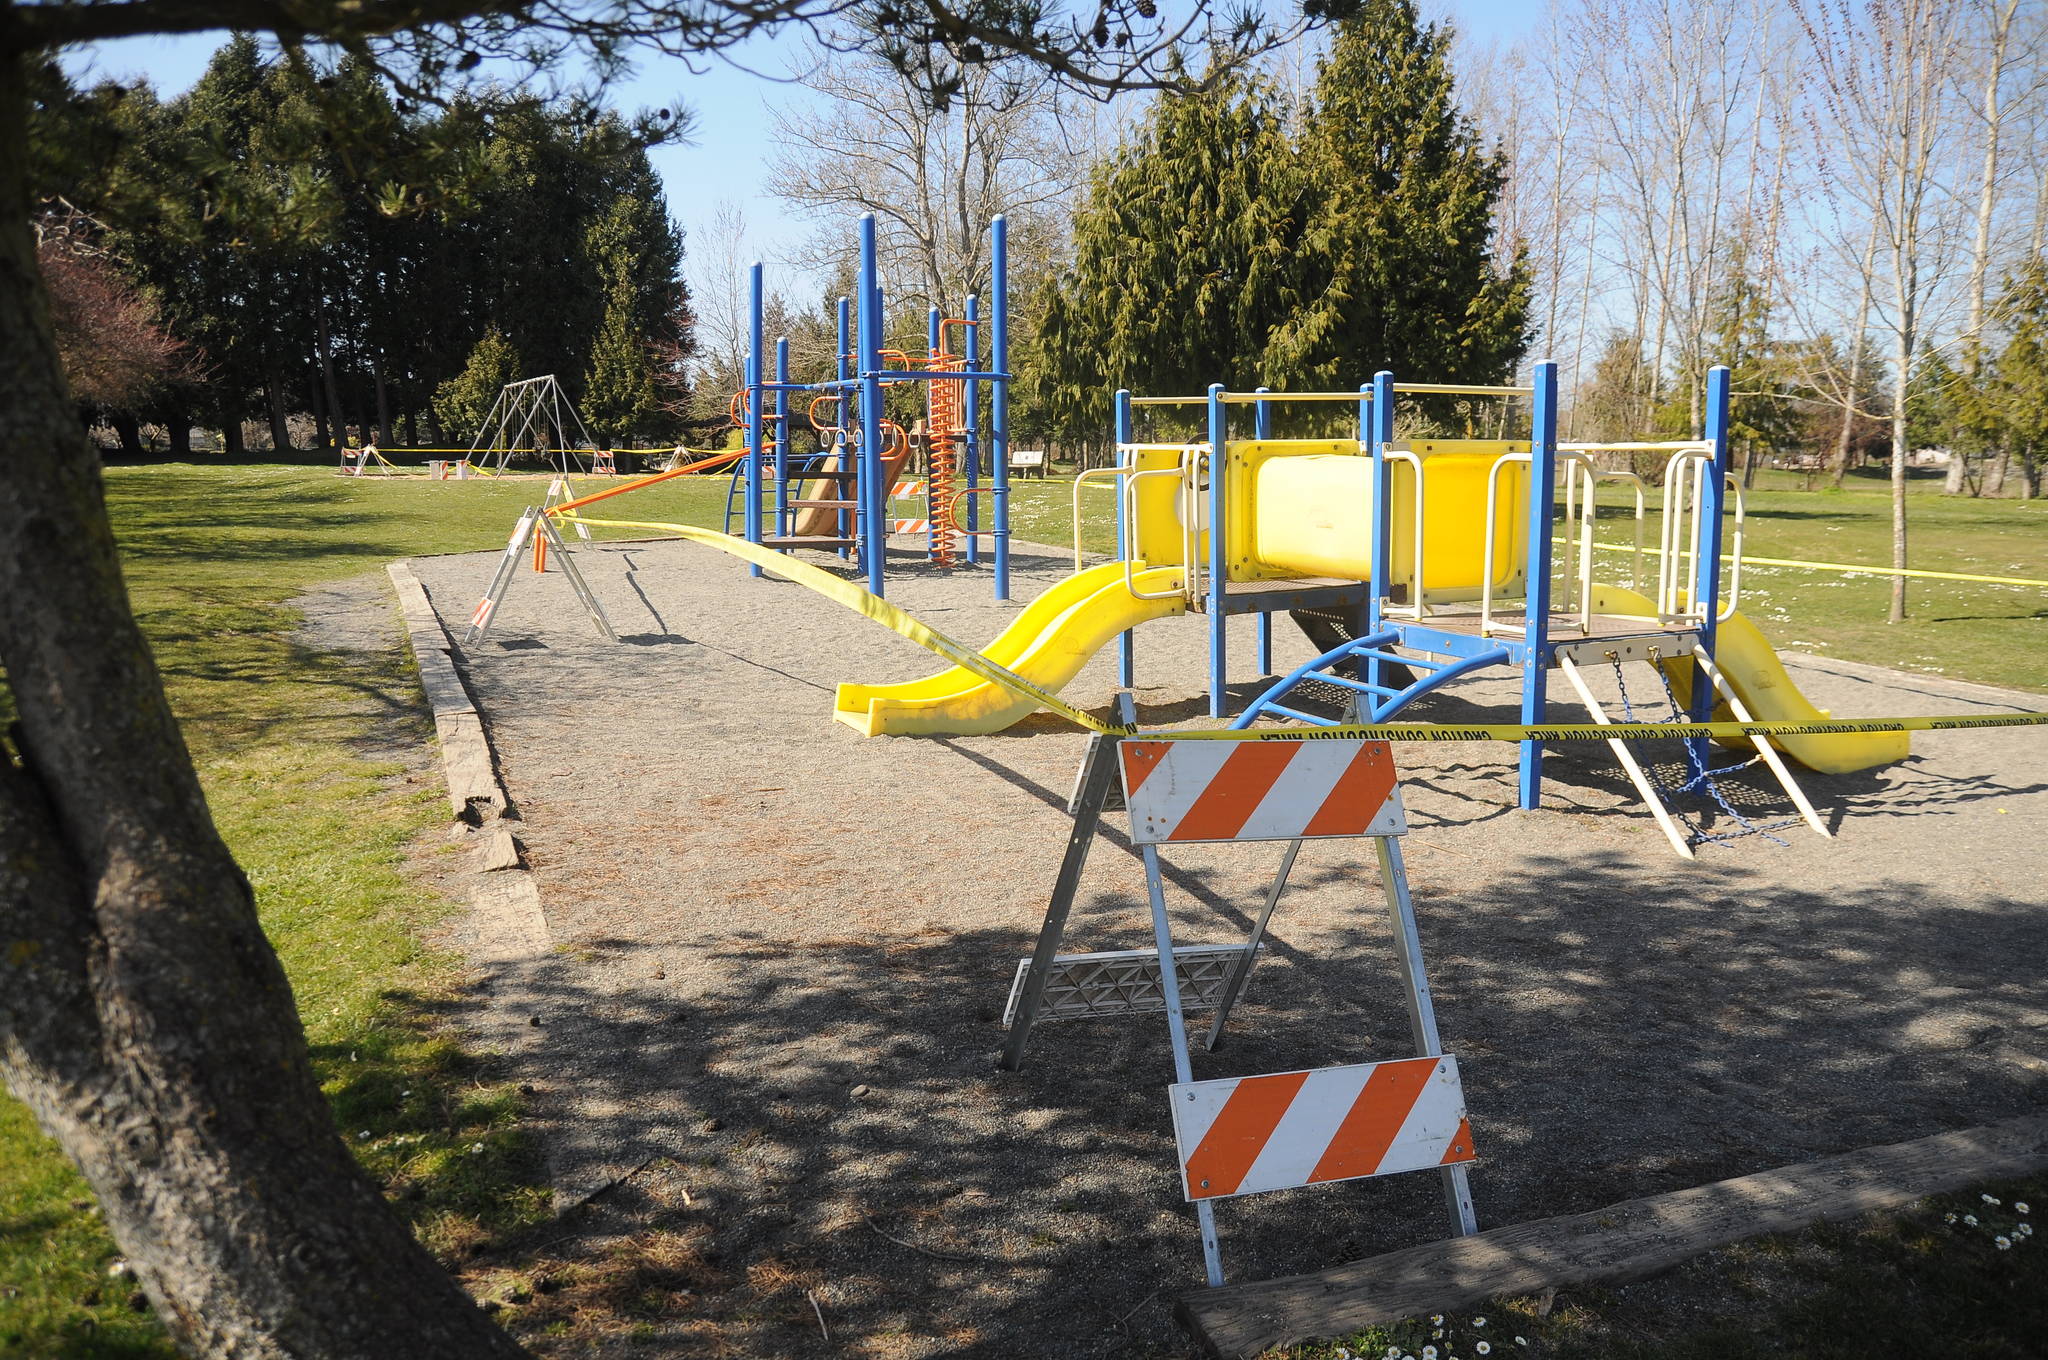 City of Sequim park playgrounds have been closed to all users, including playground equipment at Carrie Blake Community Park, since March 24. City parks will reopen for day use but playground equipment and some restrooms are closed for public use, and large gatherings and team sports will not be allowed. Sequim Gazette file photo by Michael Dashiell